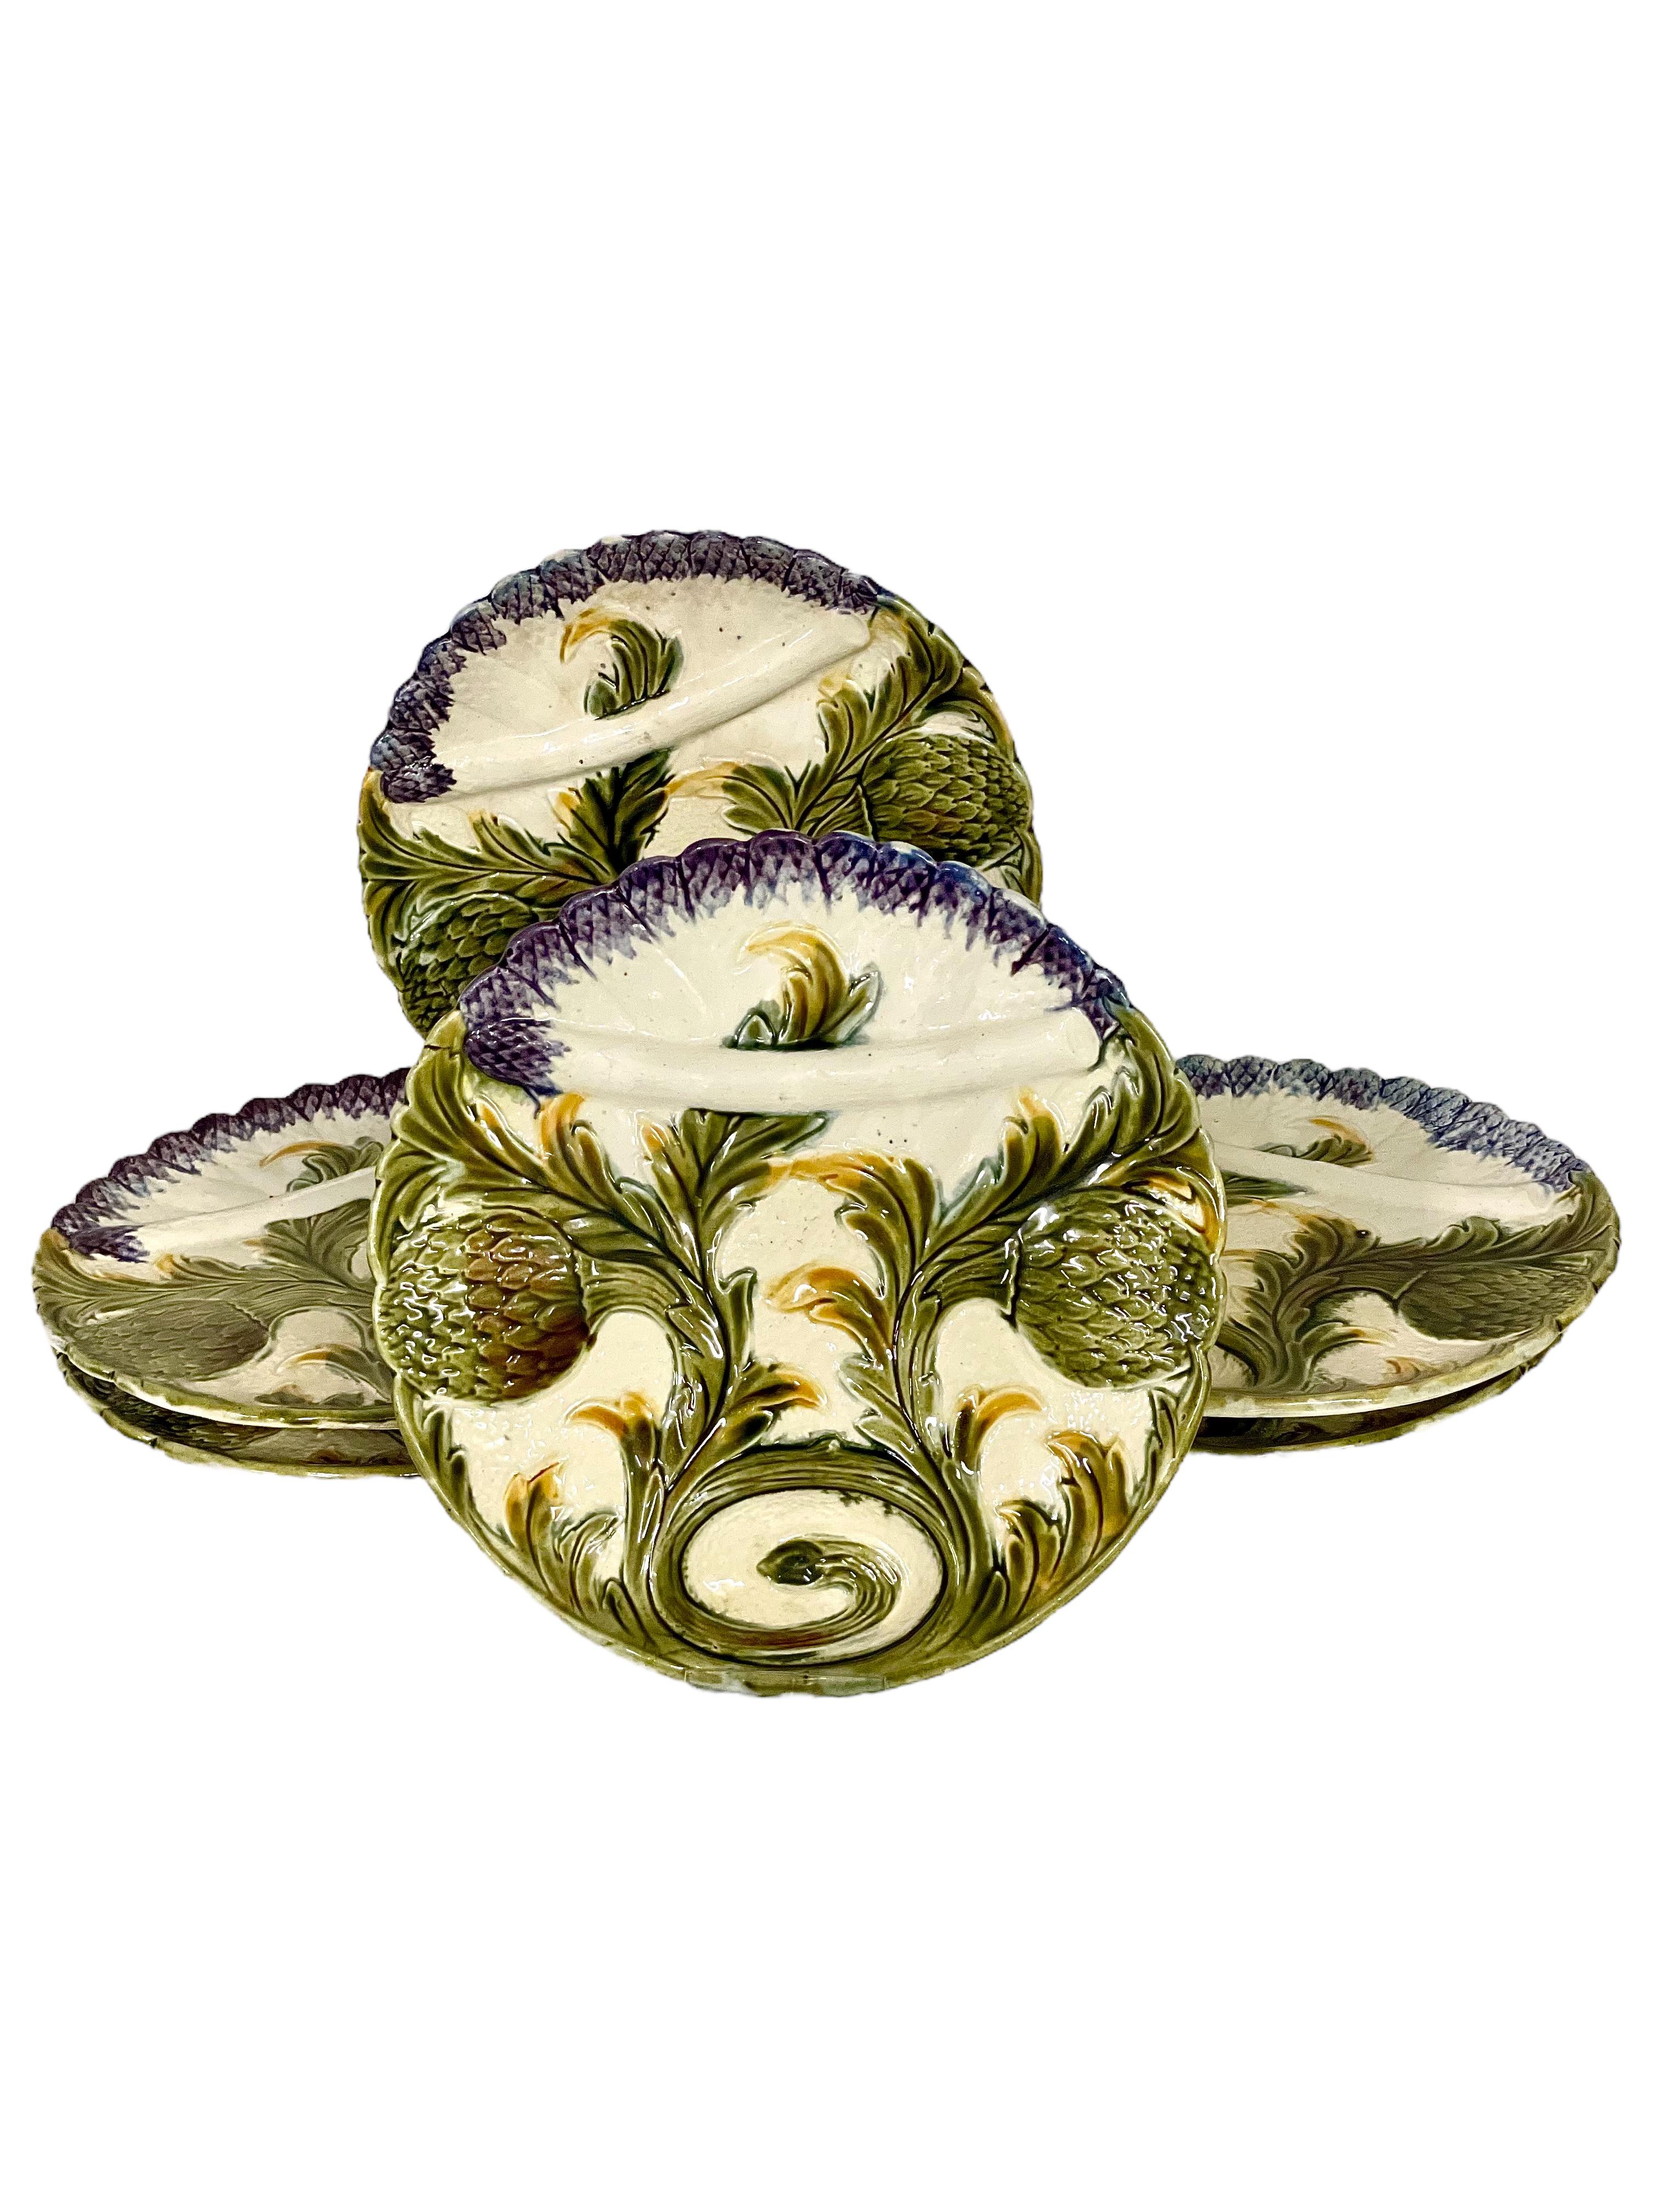 A very unusual and beautiful set of six French barbotine majolica asparagus serving plates, featuring a typical 'trompe l'oeil' textured decoration of globe artichokes and purple asparagus tips, artfully entwined with each other to create a pleasing